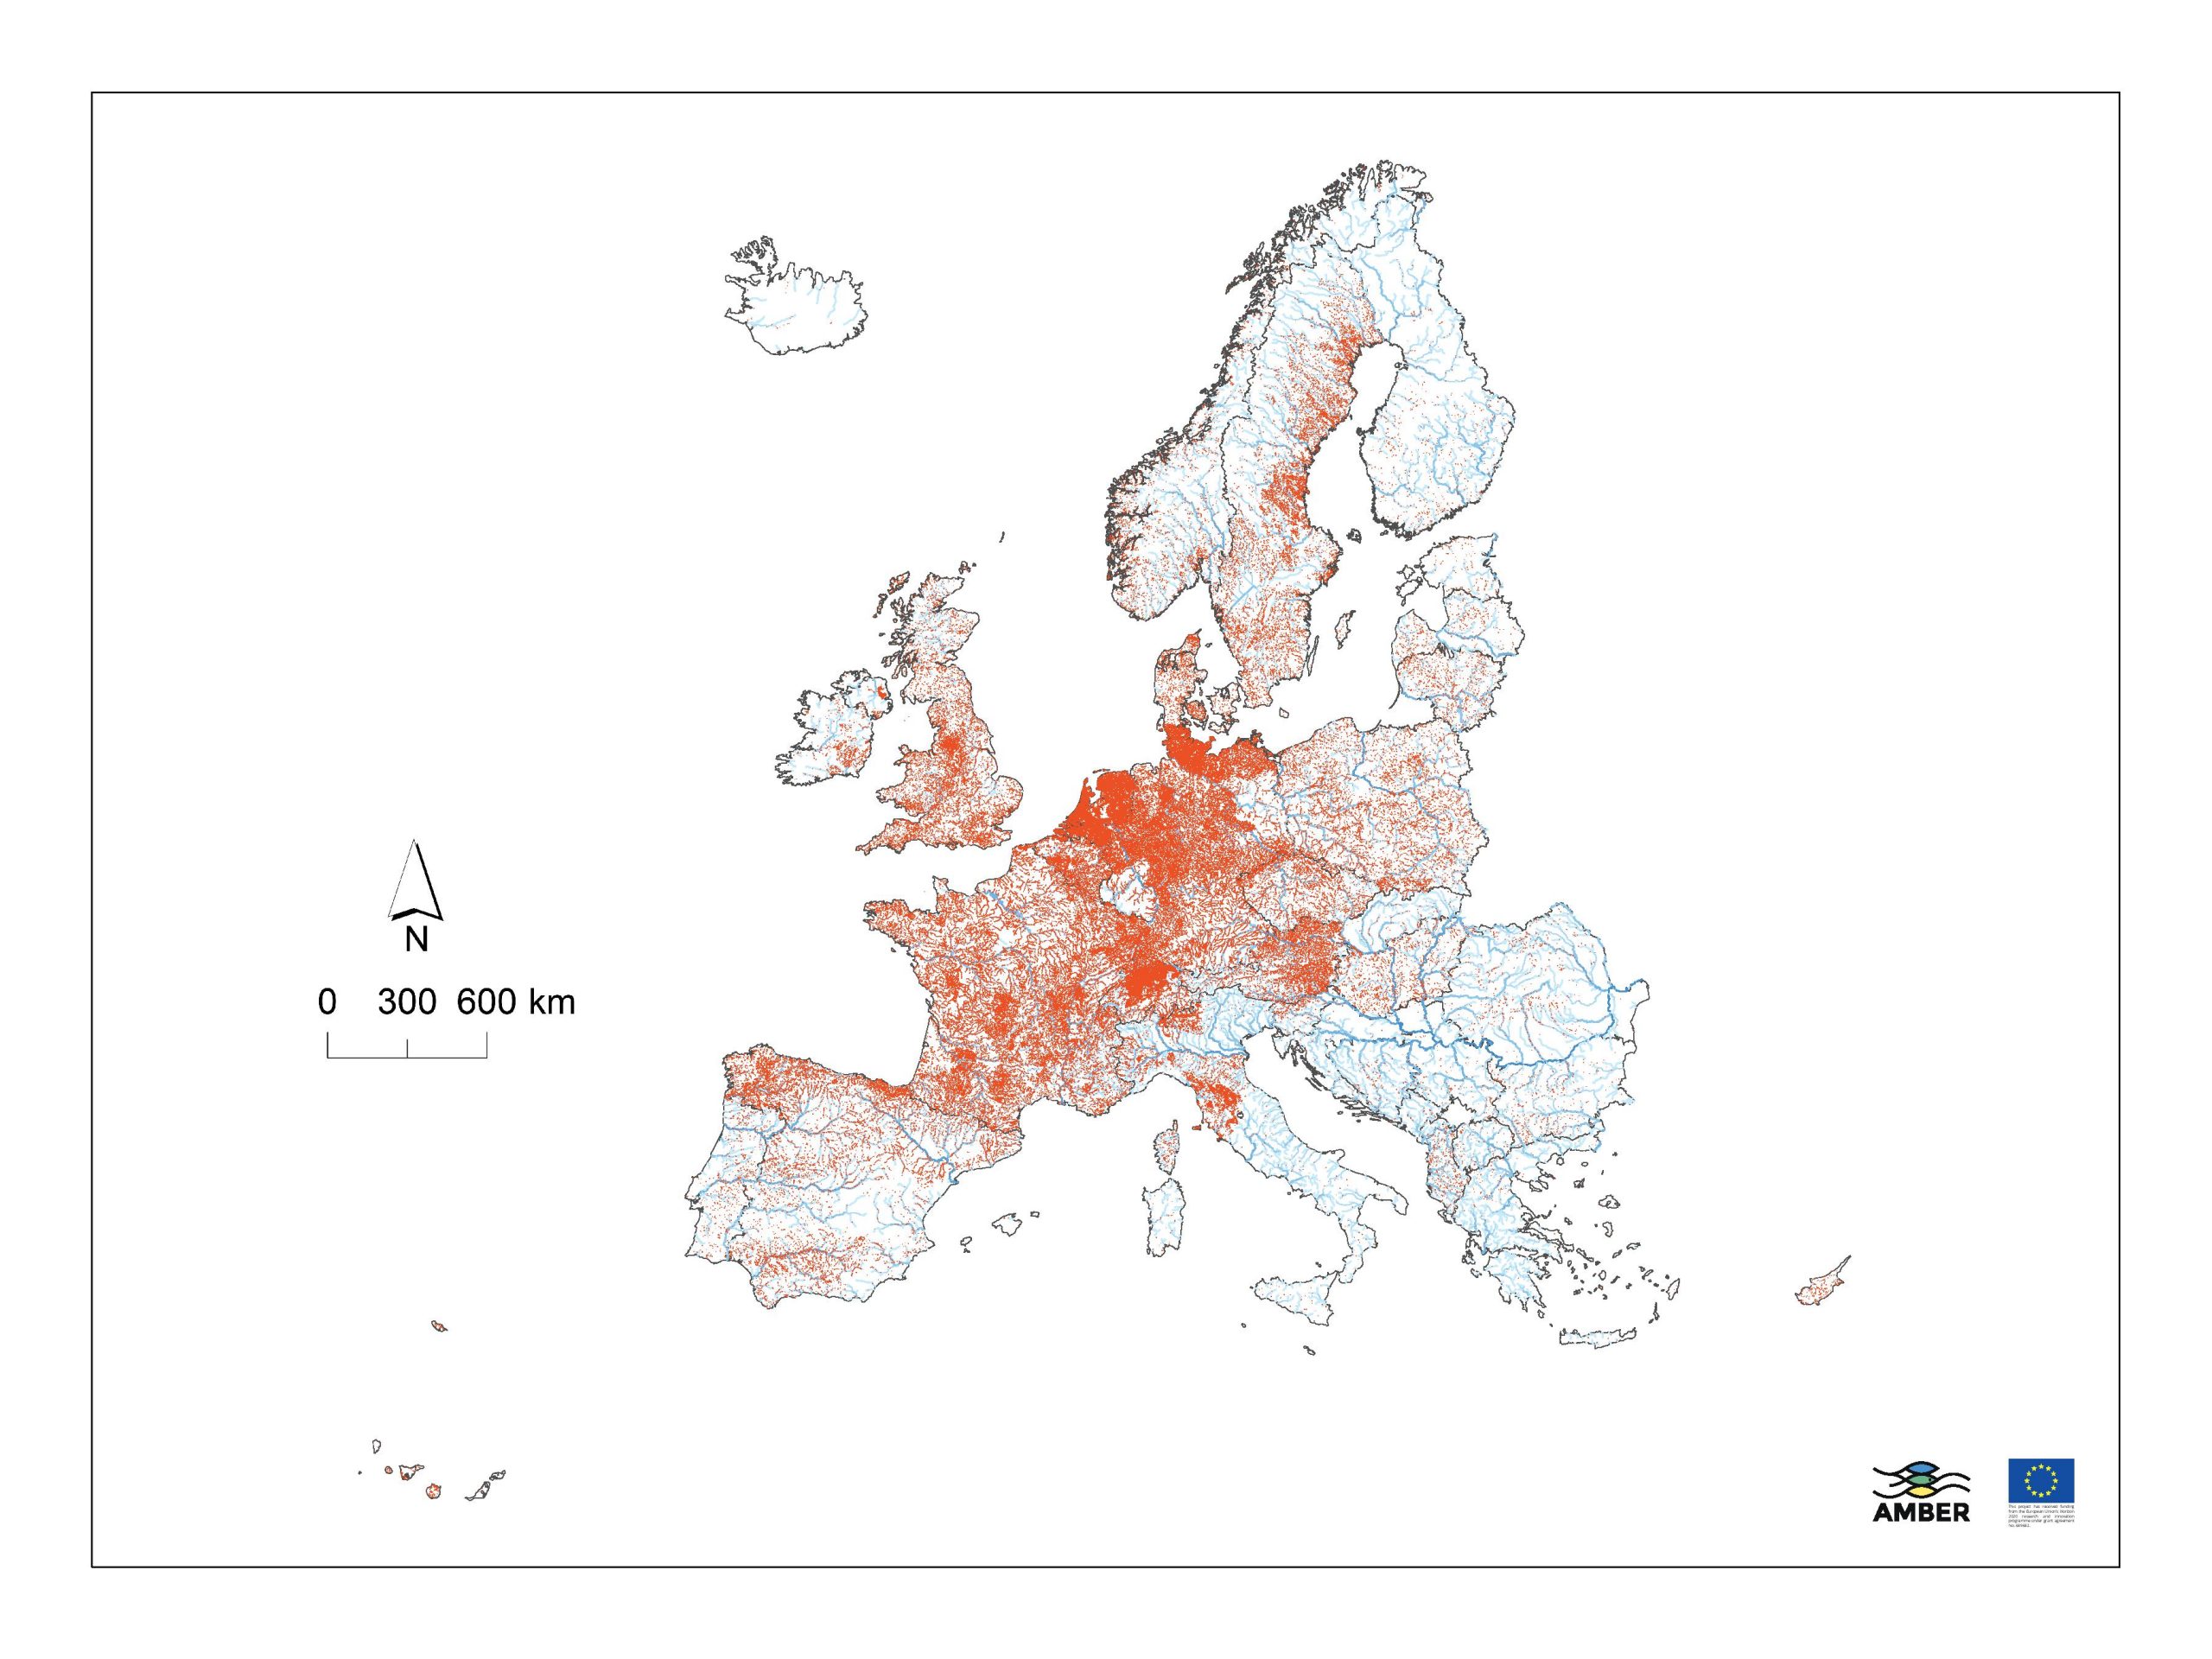 Our research finds at least 100,000 obsolete barriers are fragmenting and deteriorating Europe’s Rivers